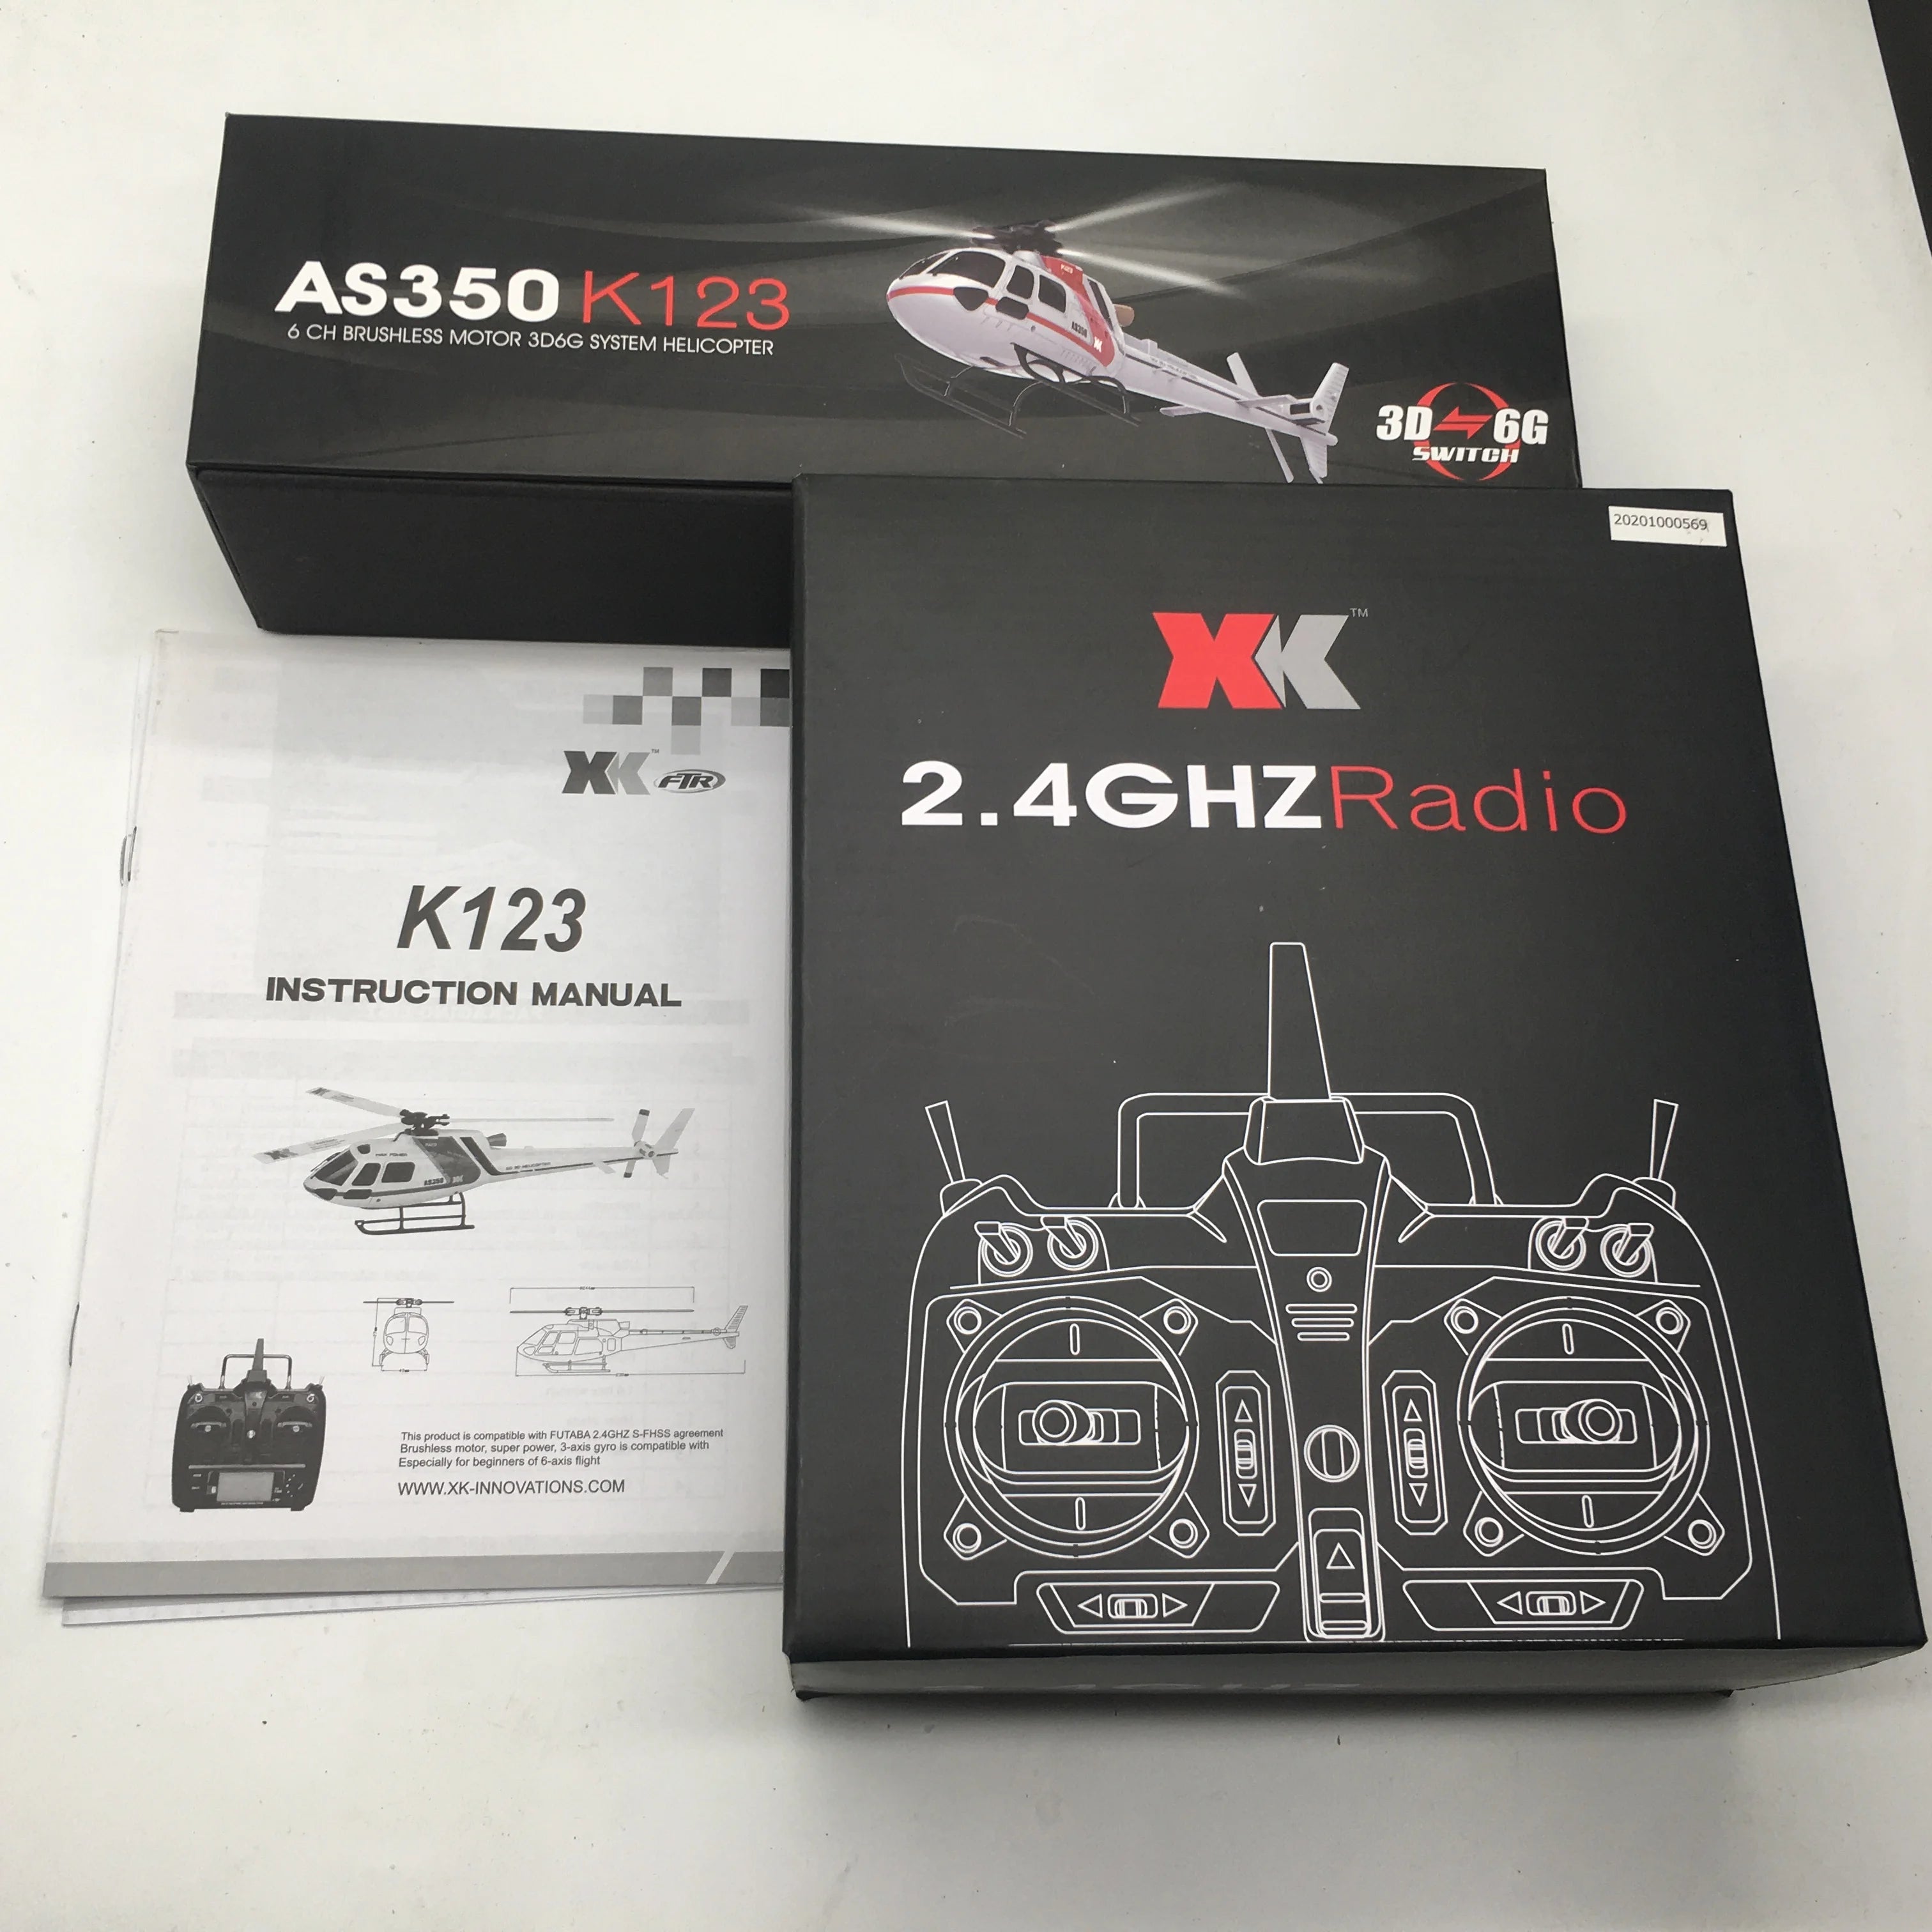 WLtoys XK K123 AS350 RC Helicopter, Especially for beginners of 6-axis flight WWWXK-INNOVATIONS.